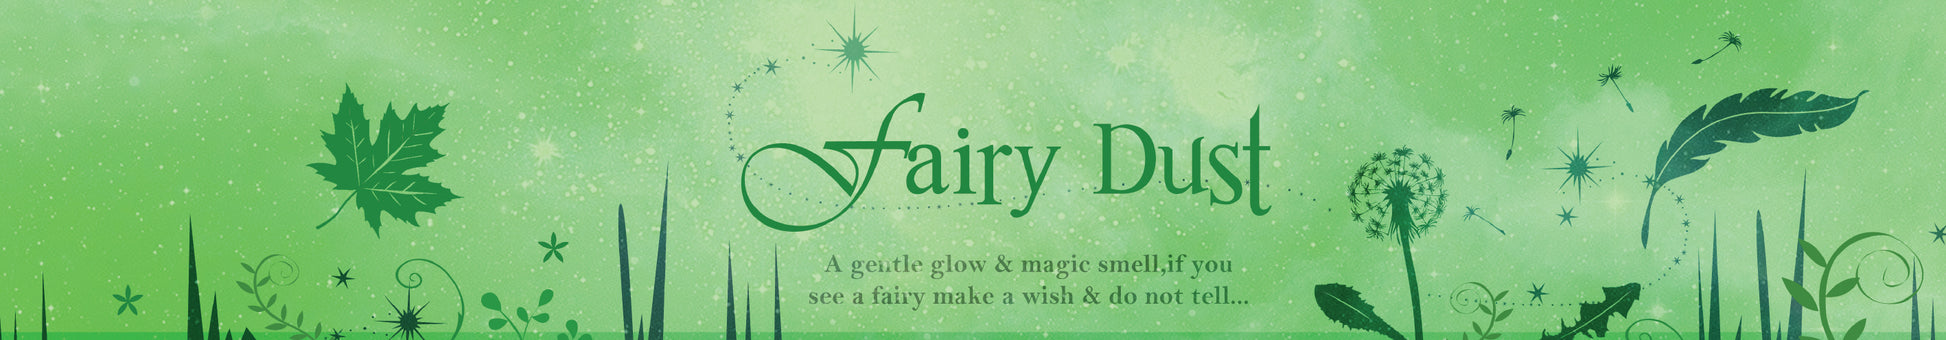 Fairy Dust tinkerbell inspired scented candle label design | Happy Piranha.